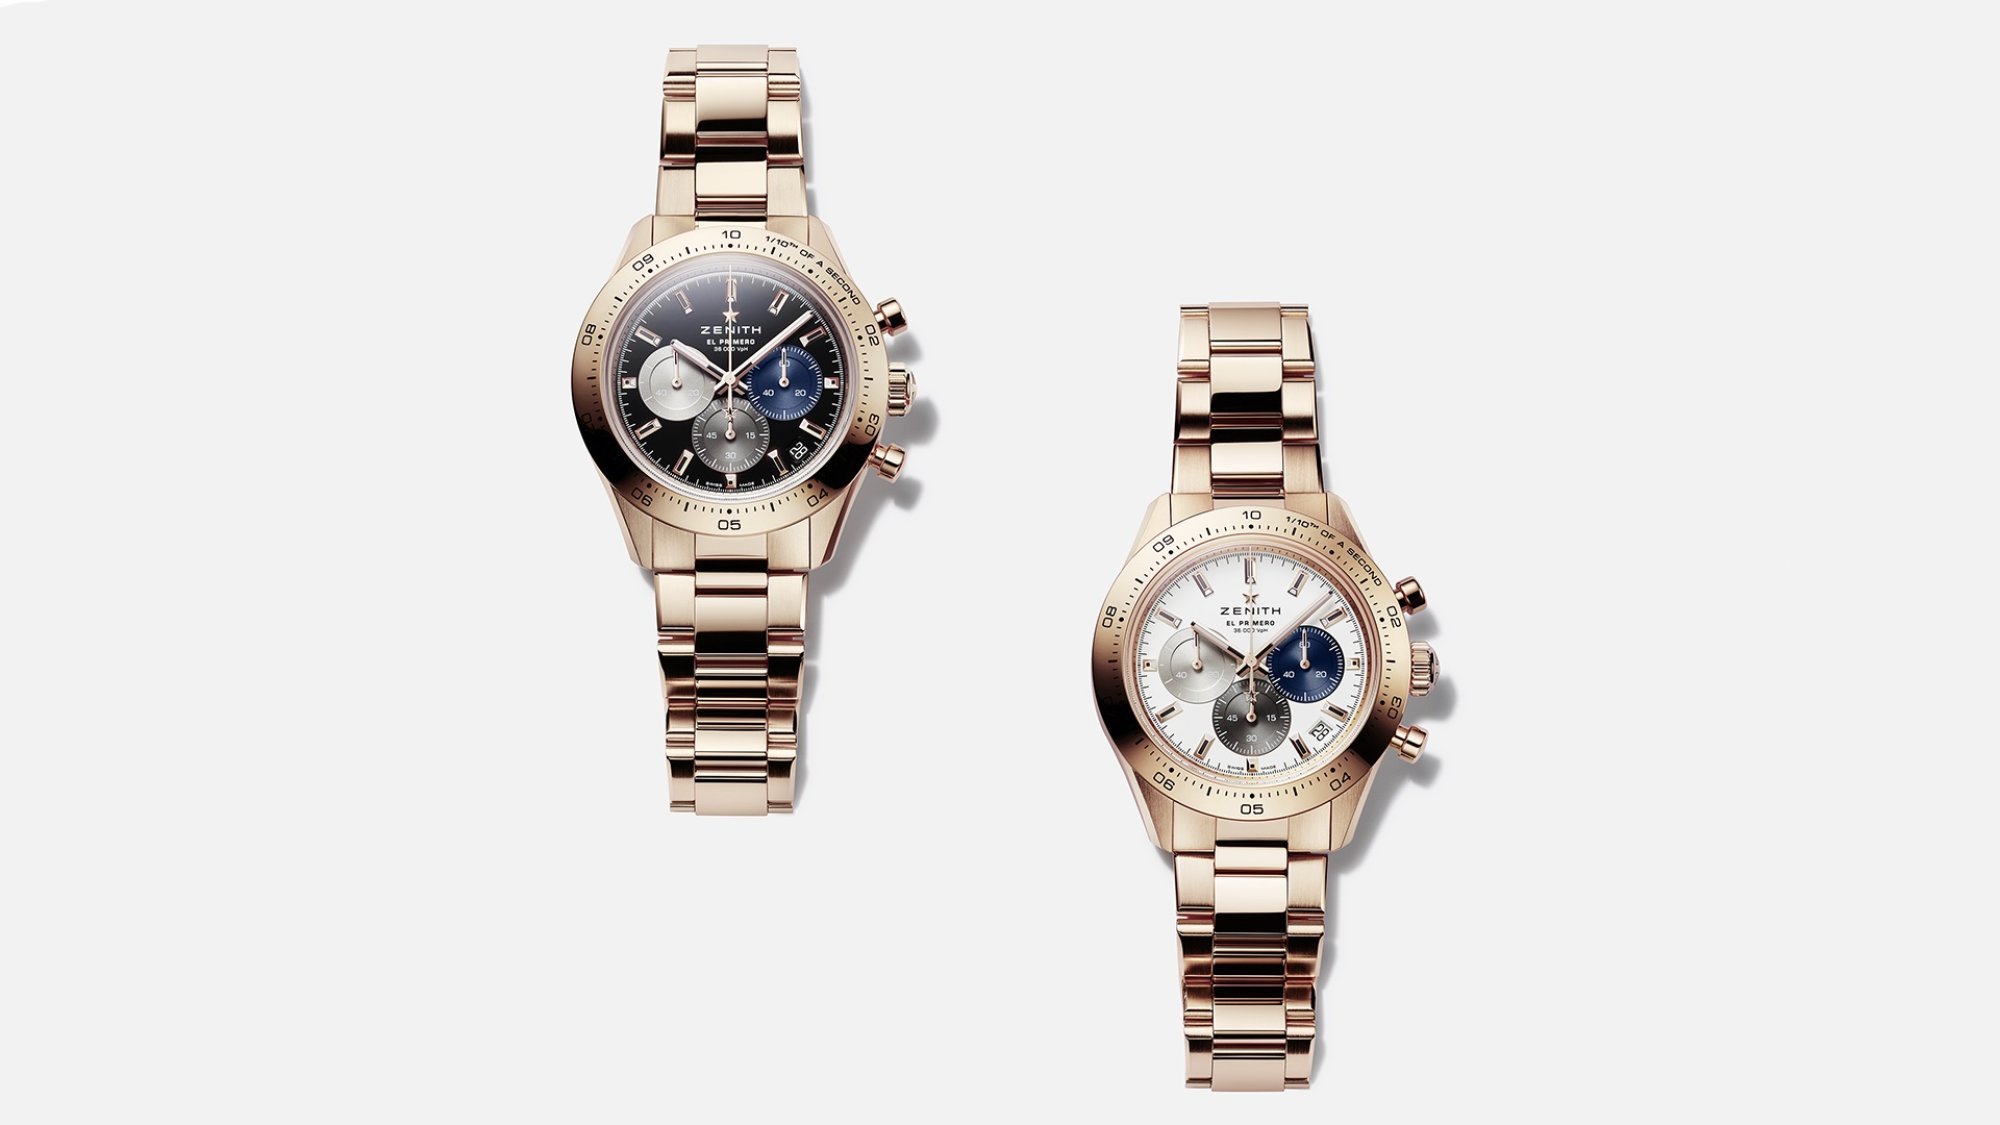 How luxury watch brands are becoming more sustainable and ethical, from Tag  Heuer's lab-grown diamonds and solar-powered movement, to Van Cleef &  Arpels 'designing out waste